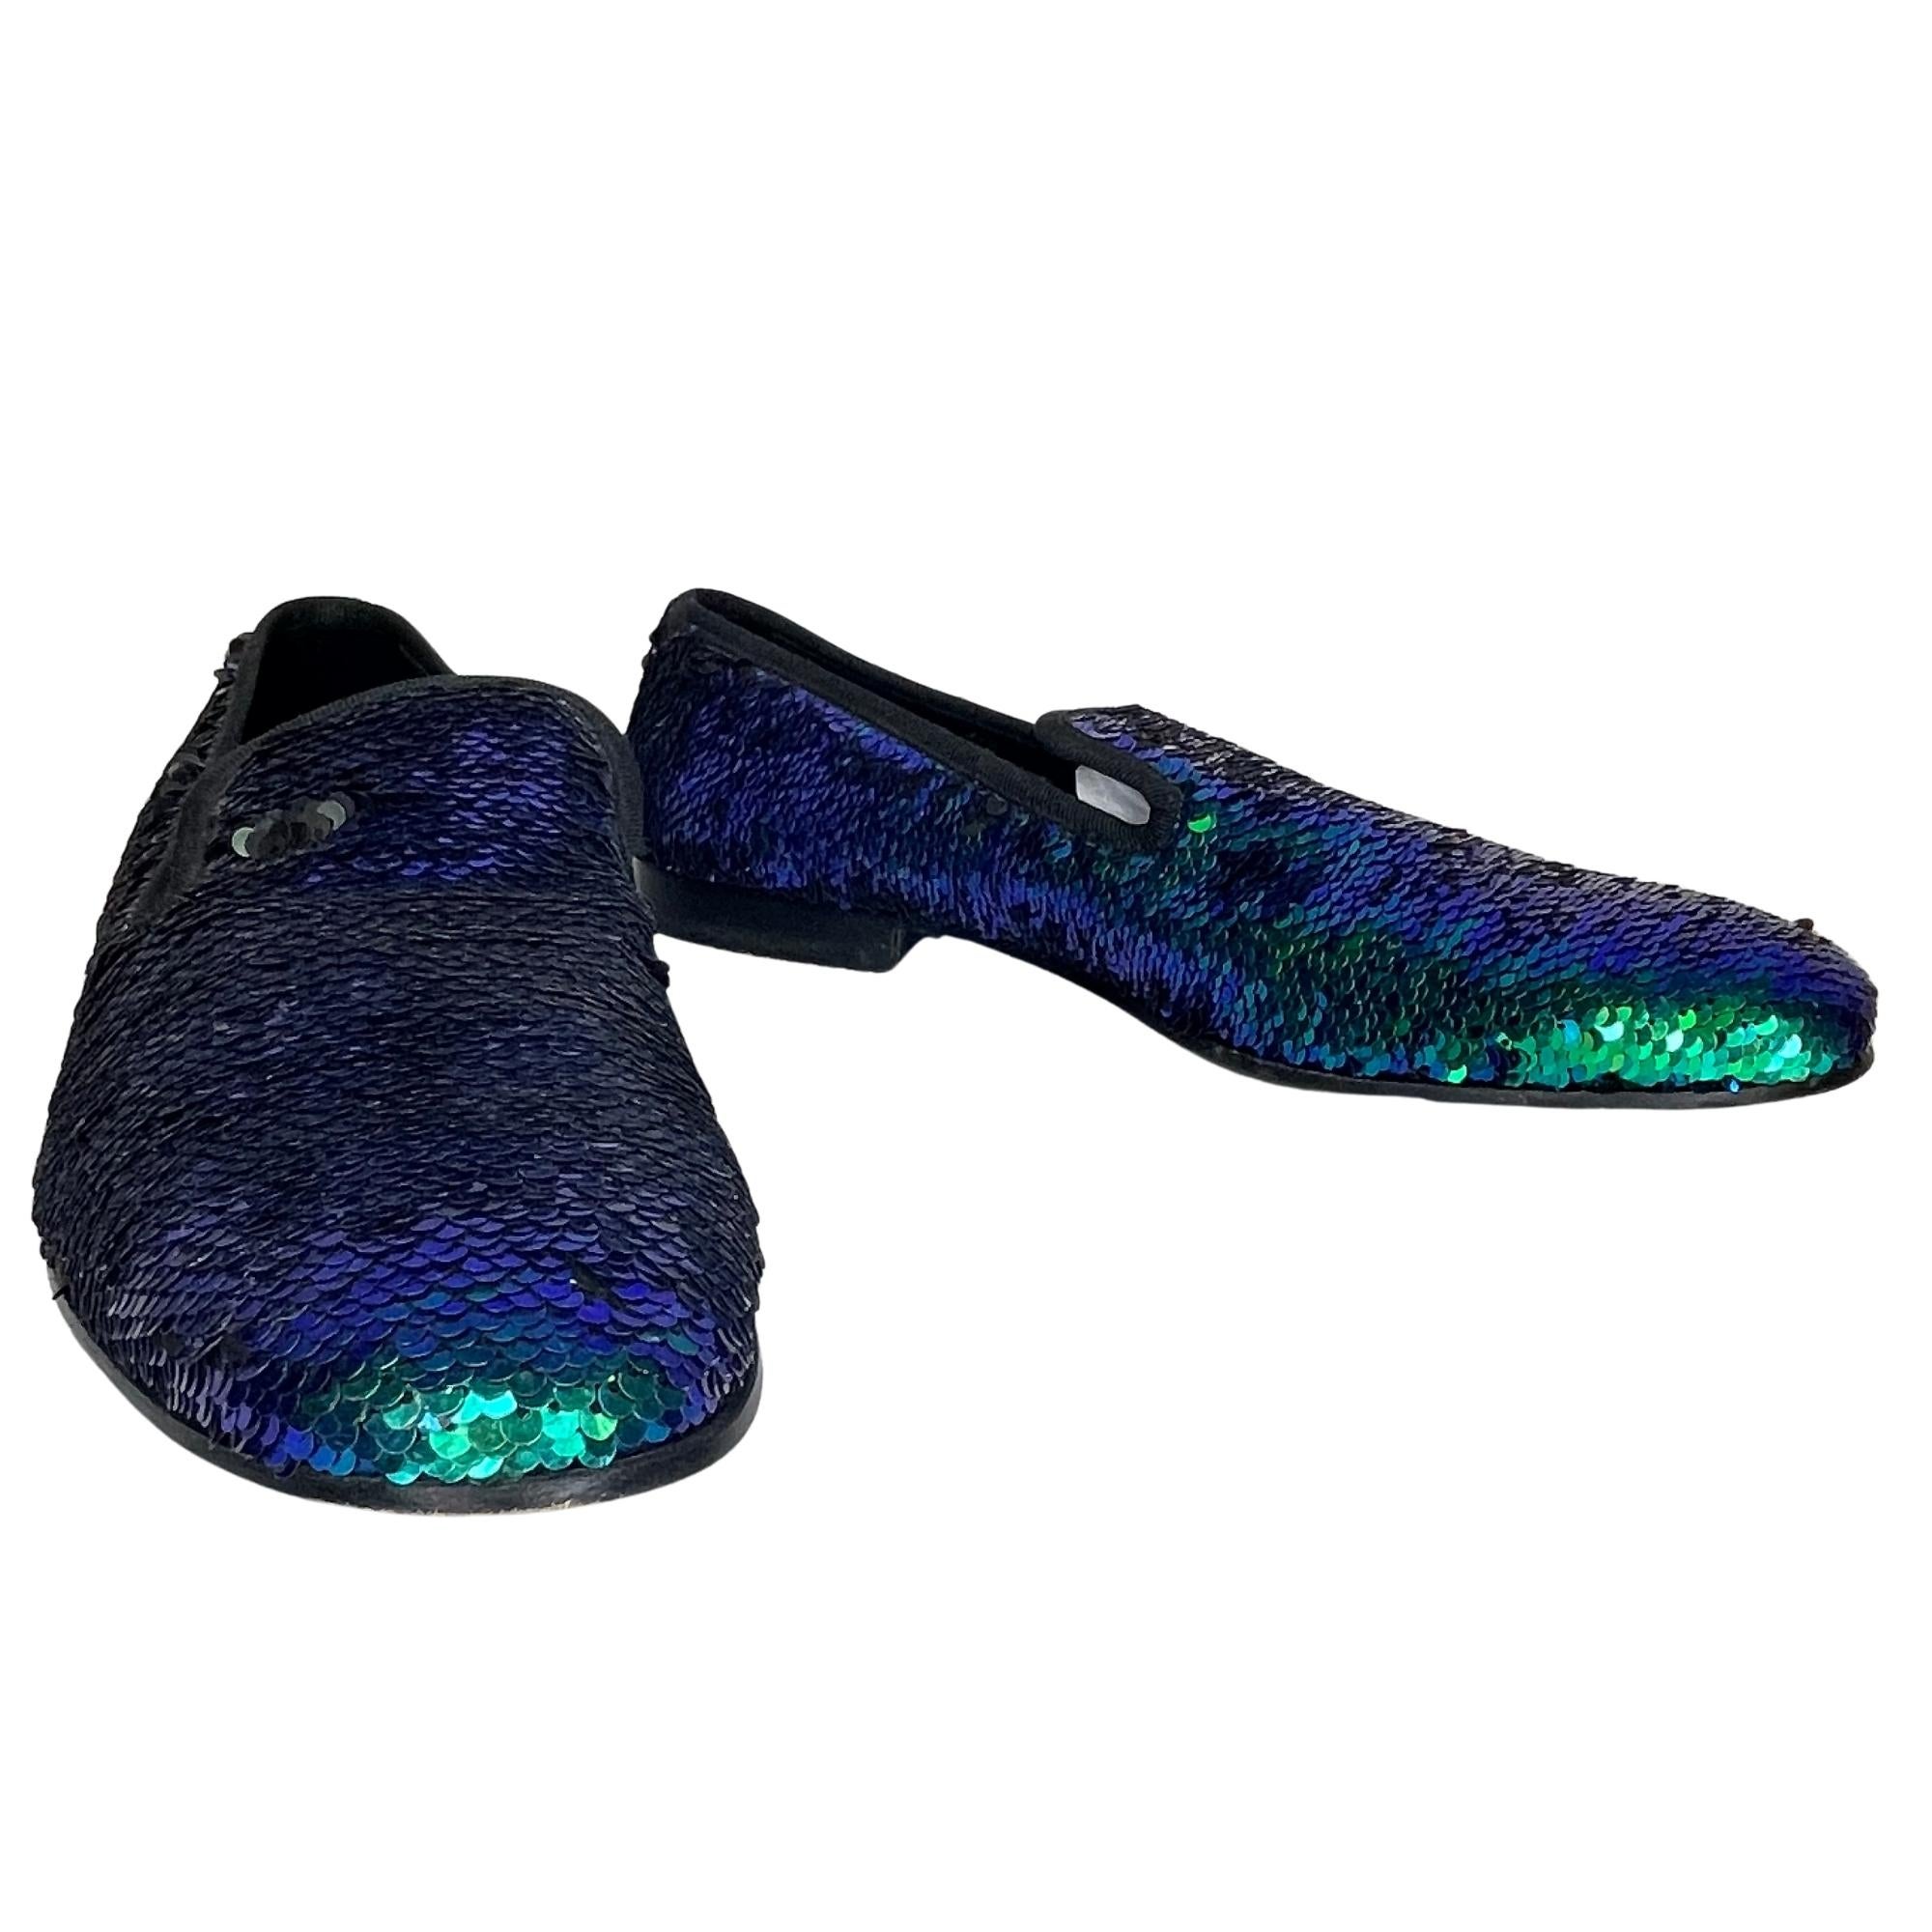 COLOR: Turquouise
MATERIAL: Sequin
SIZE: Men’s 42 EU / 9 US 
CONDITION: Good - uppers are in decent condition and the bottoms are scratched up with marks, stains and scuffs.

Made in Italy